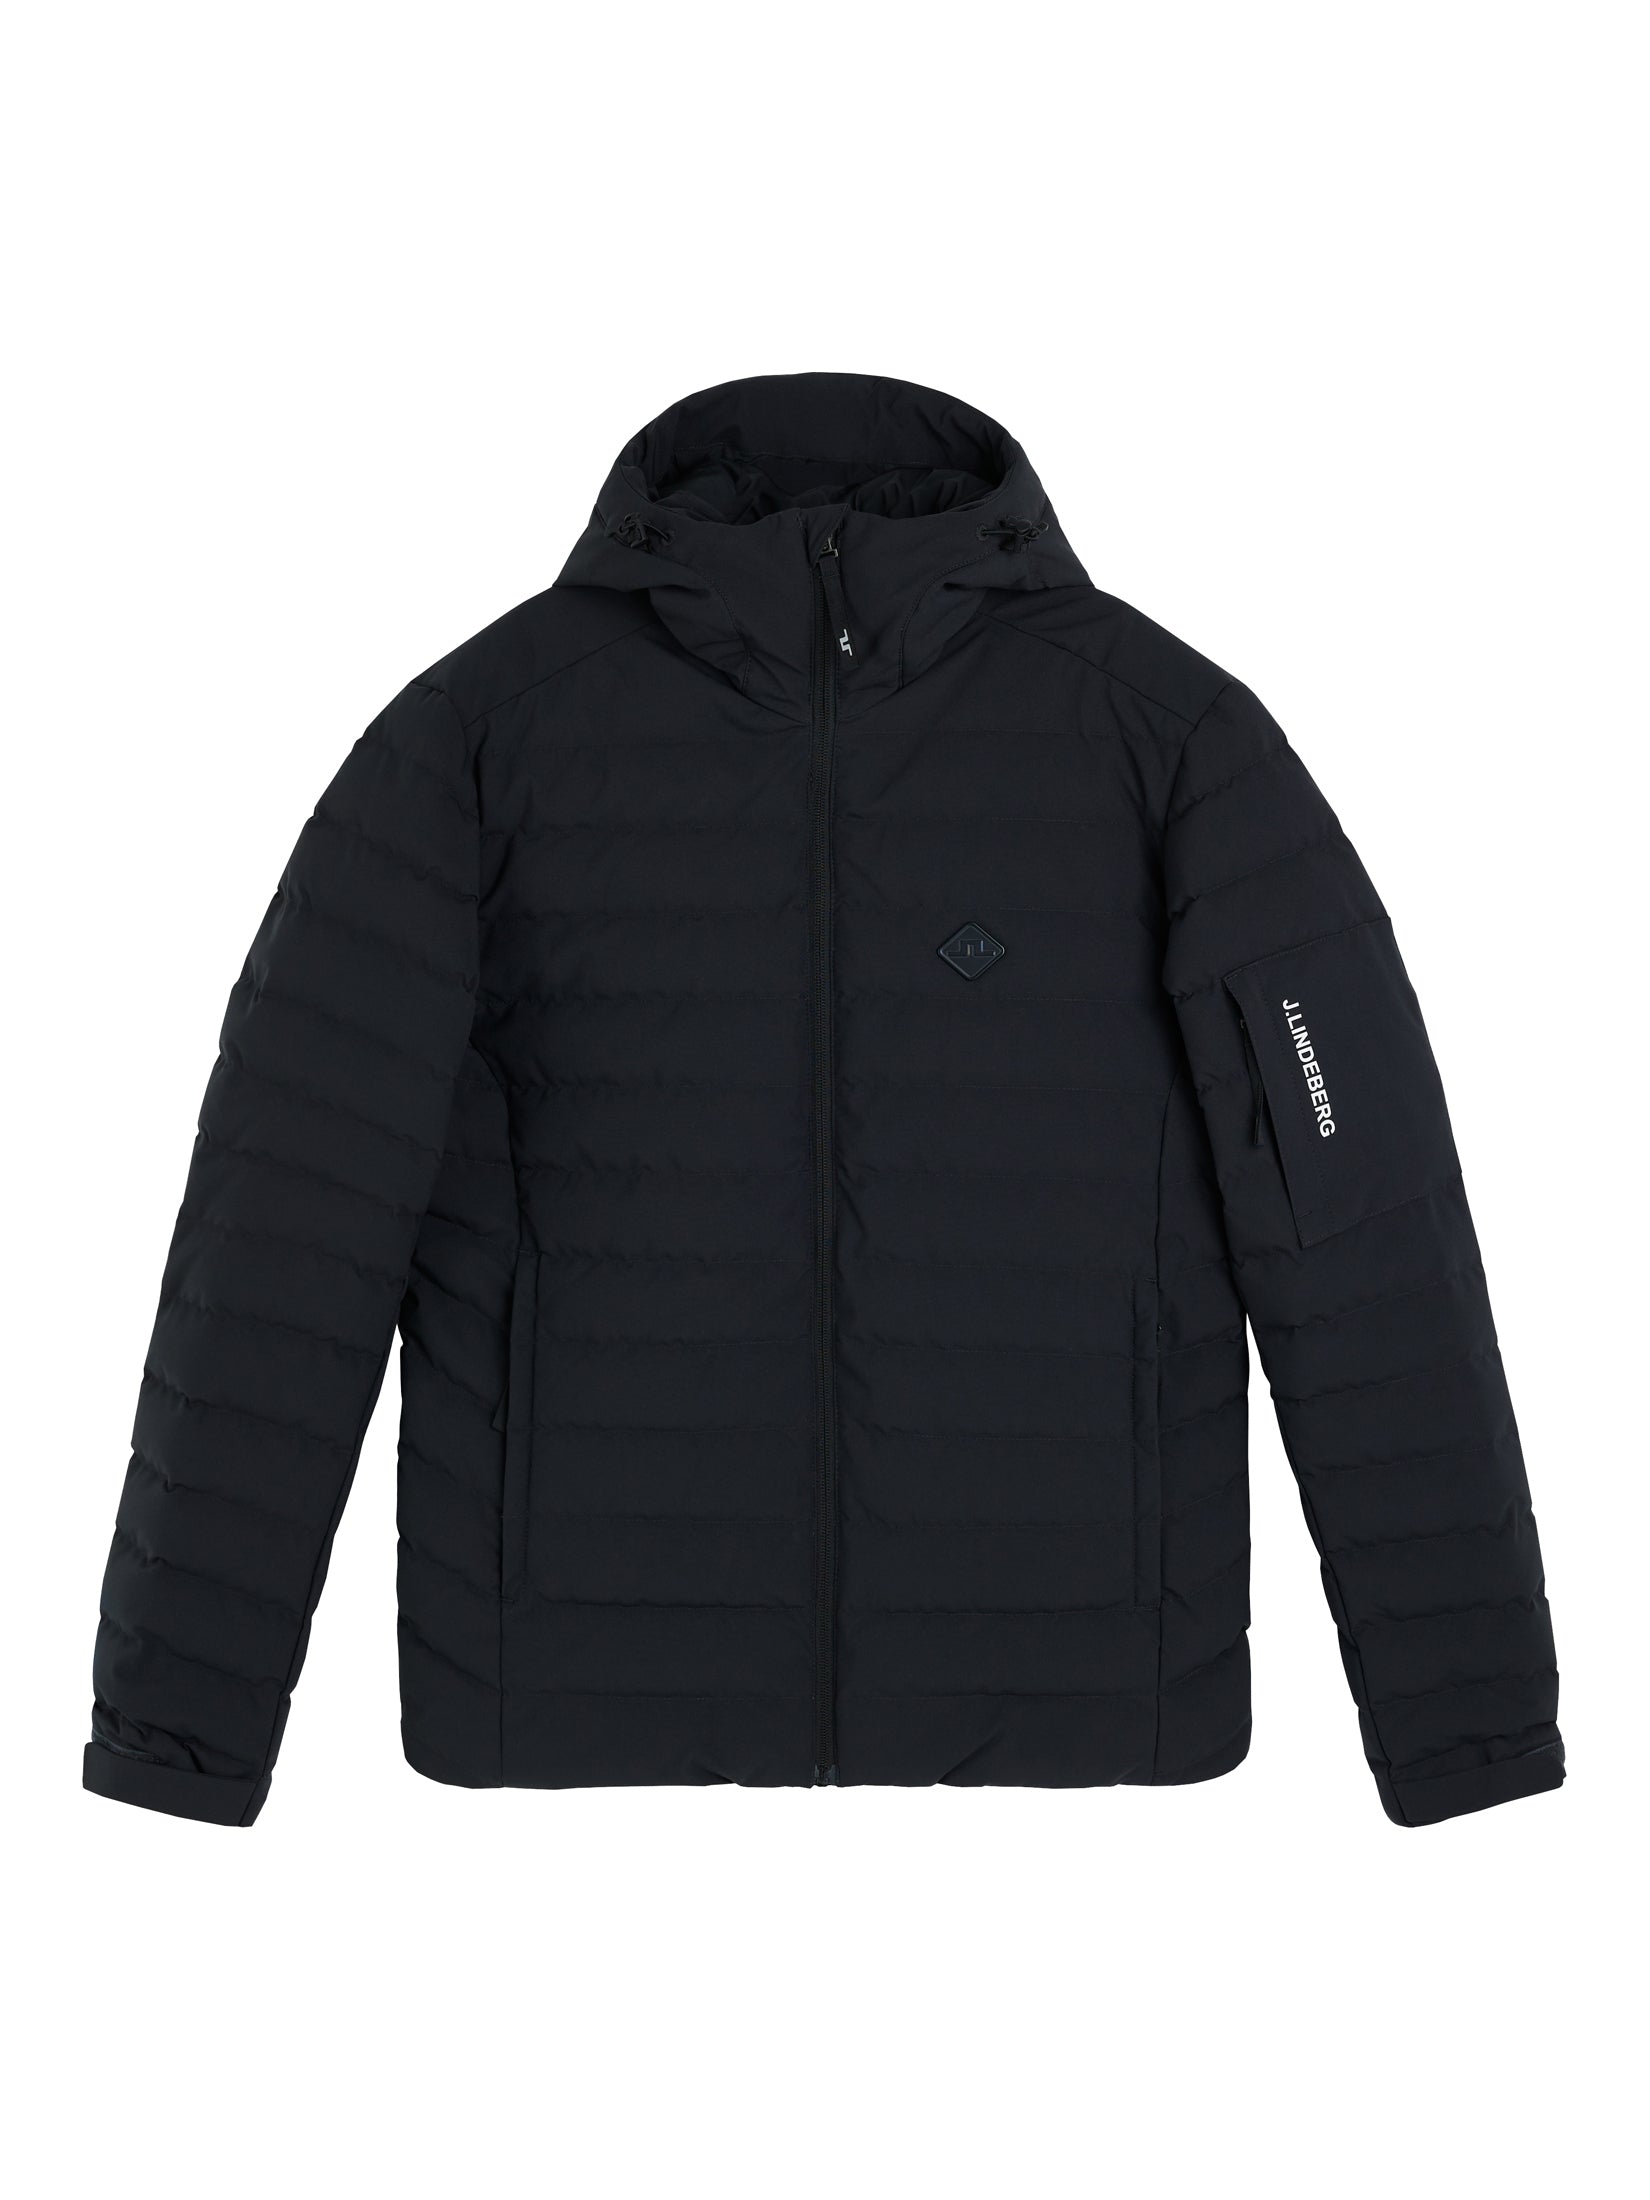 Thermic Pro Down Jacket